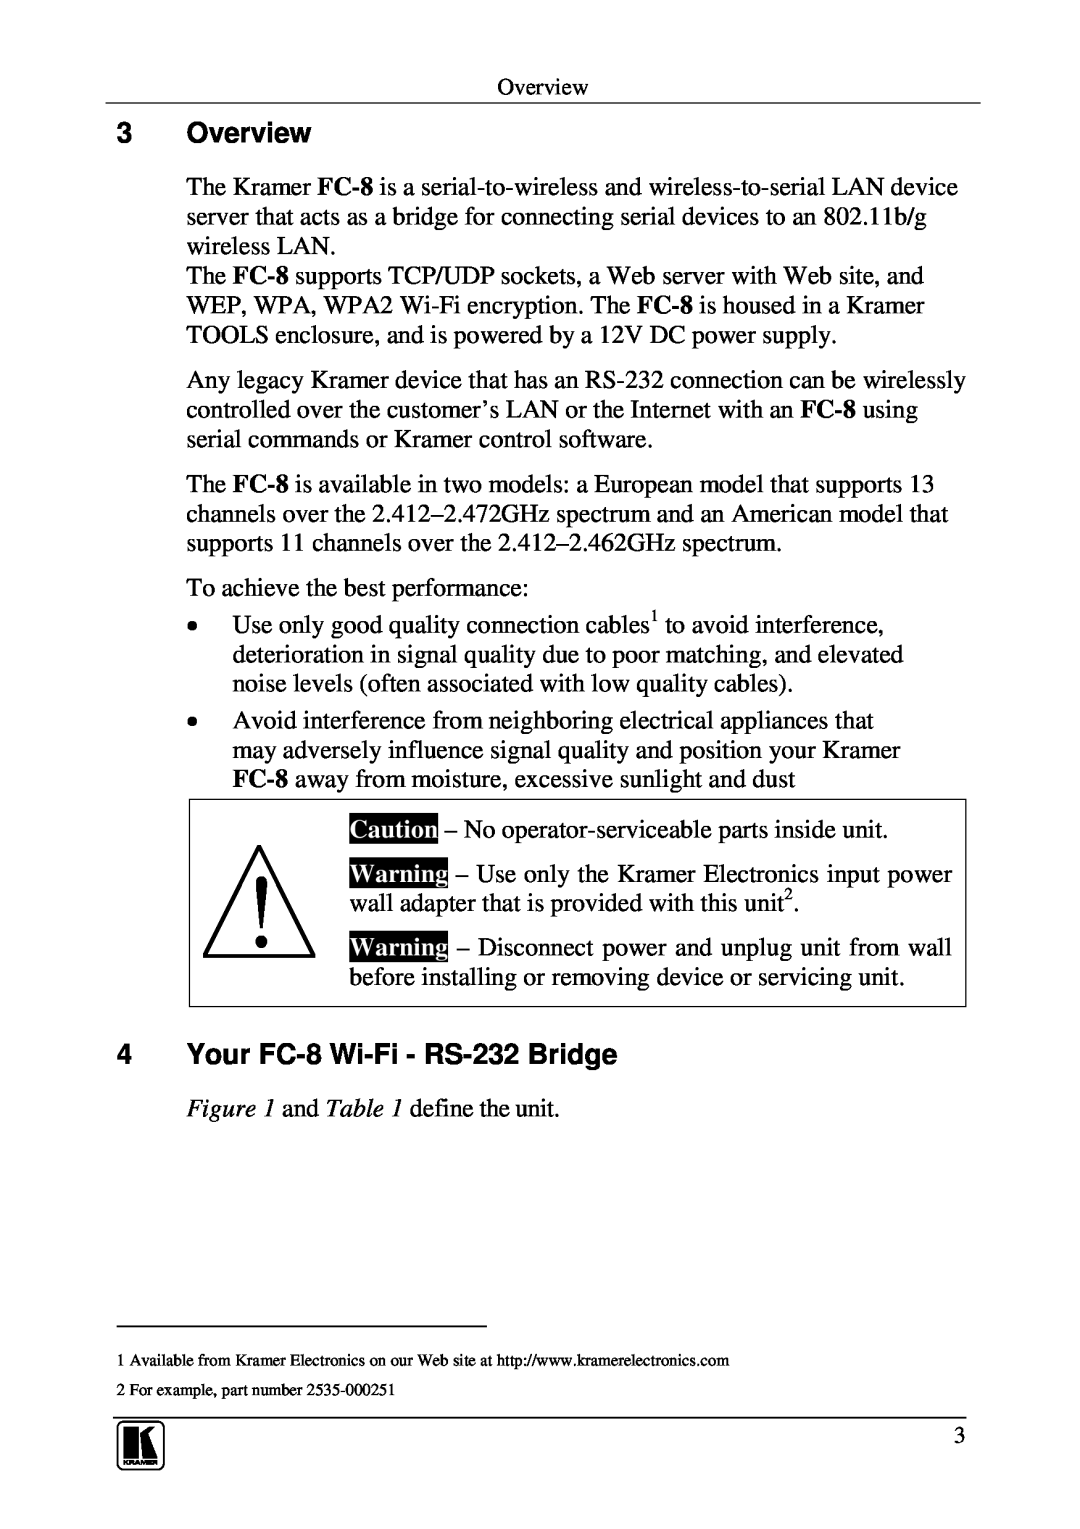 Kramer Electronics user manual Overview, Your FC-8 Wi-Fi - RS-232 Bridge 